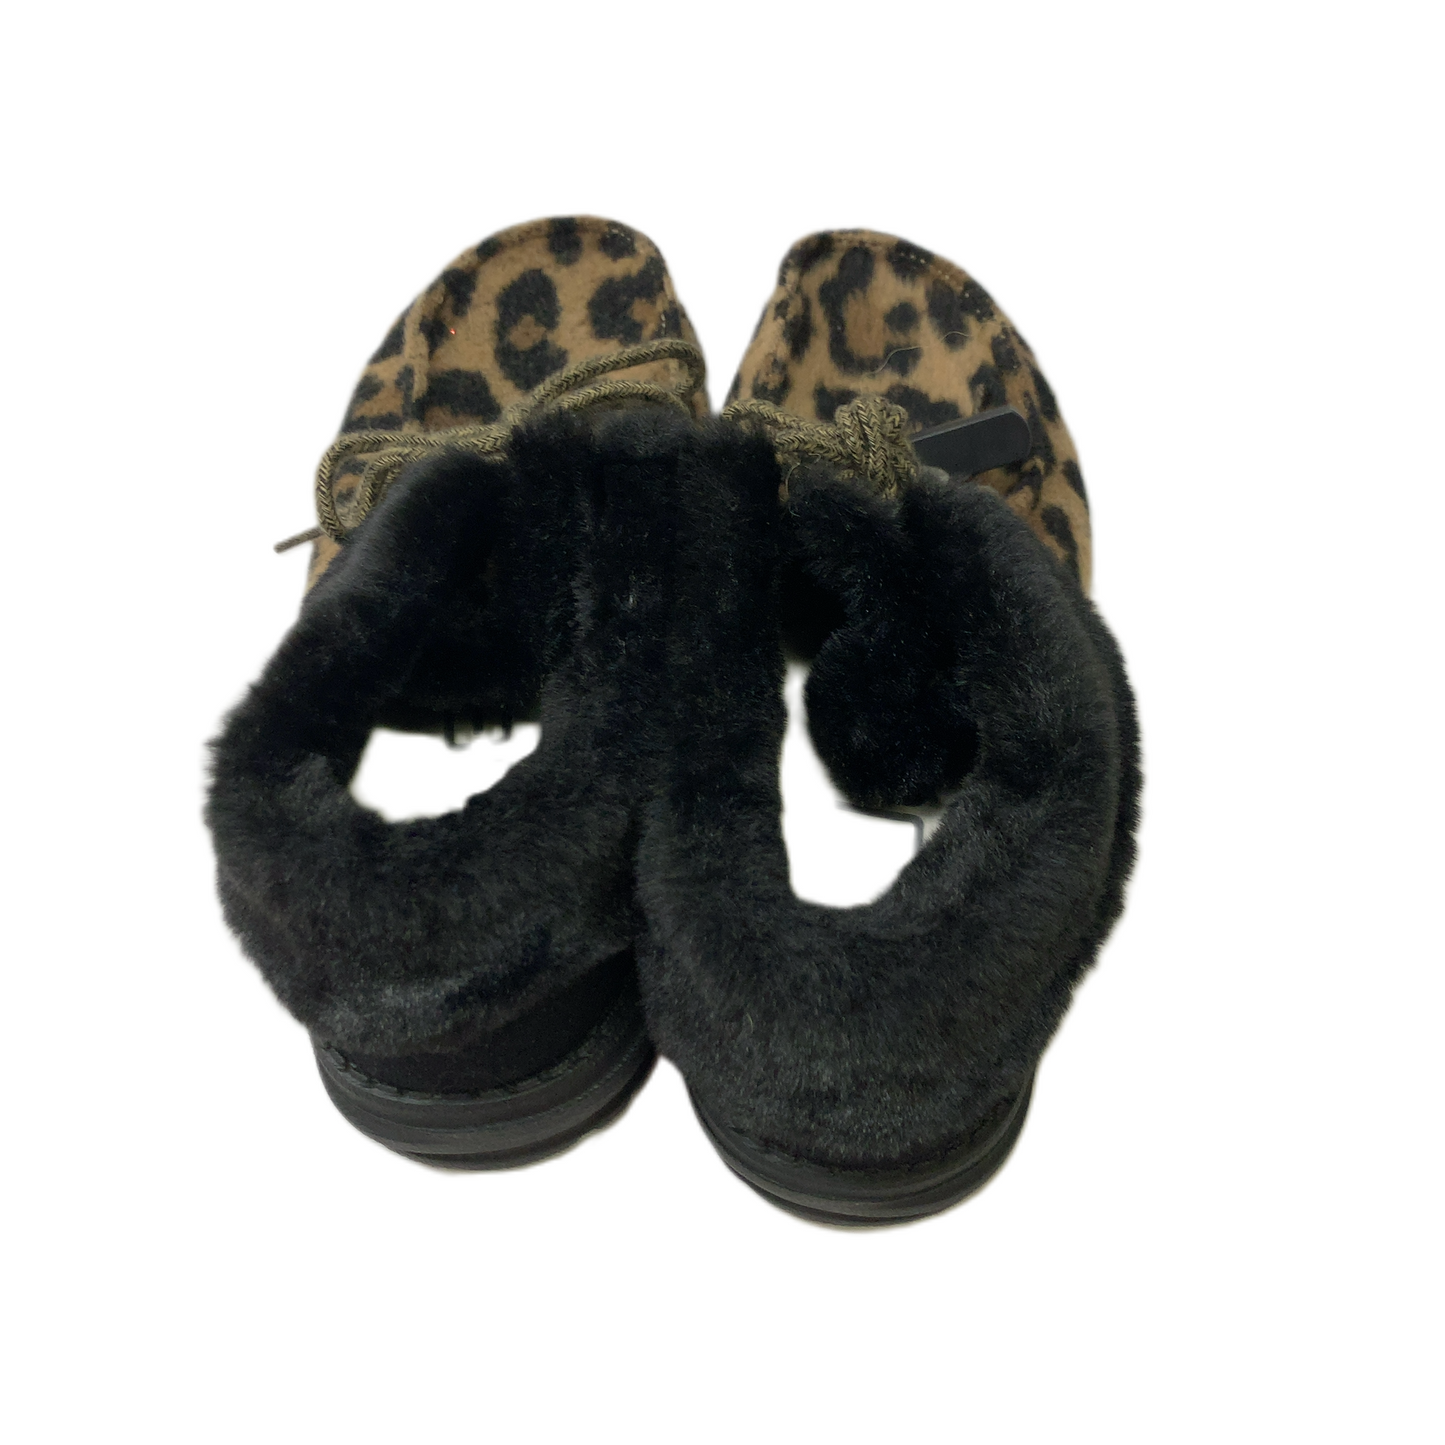 Animal Print  Shoes Flats By Hey Dude  Size: 7